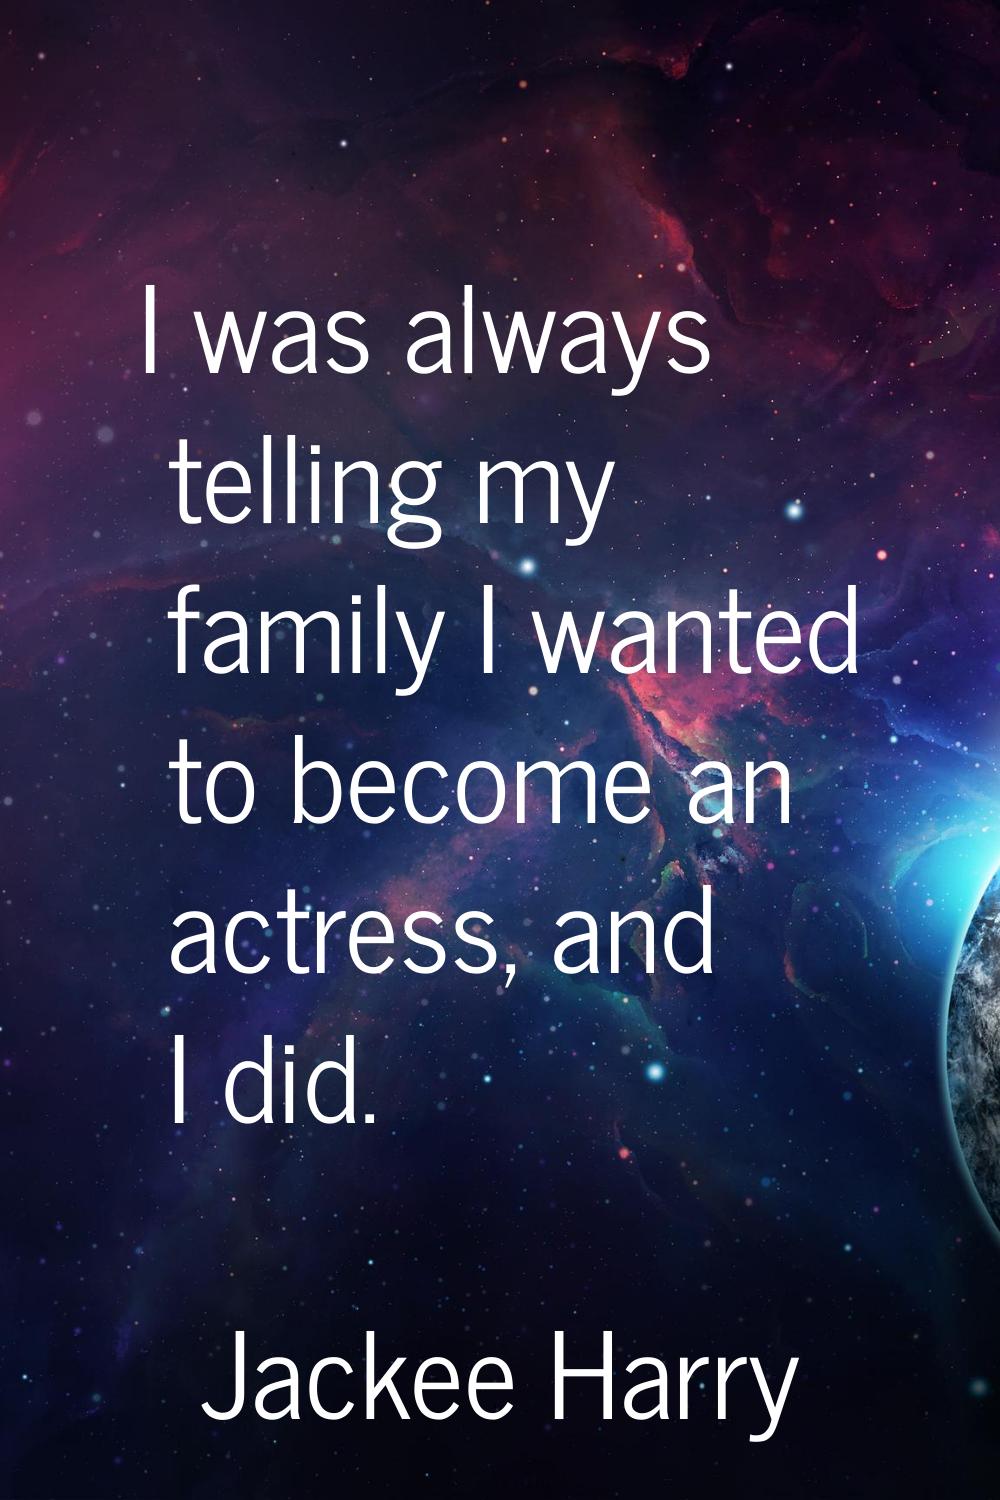 I was always telling my family I wanted to become an actress, and I did.